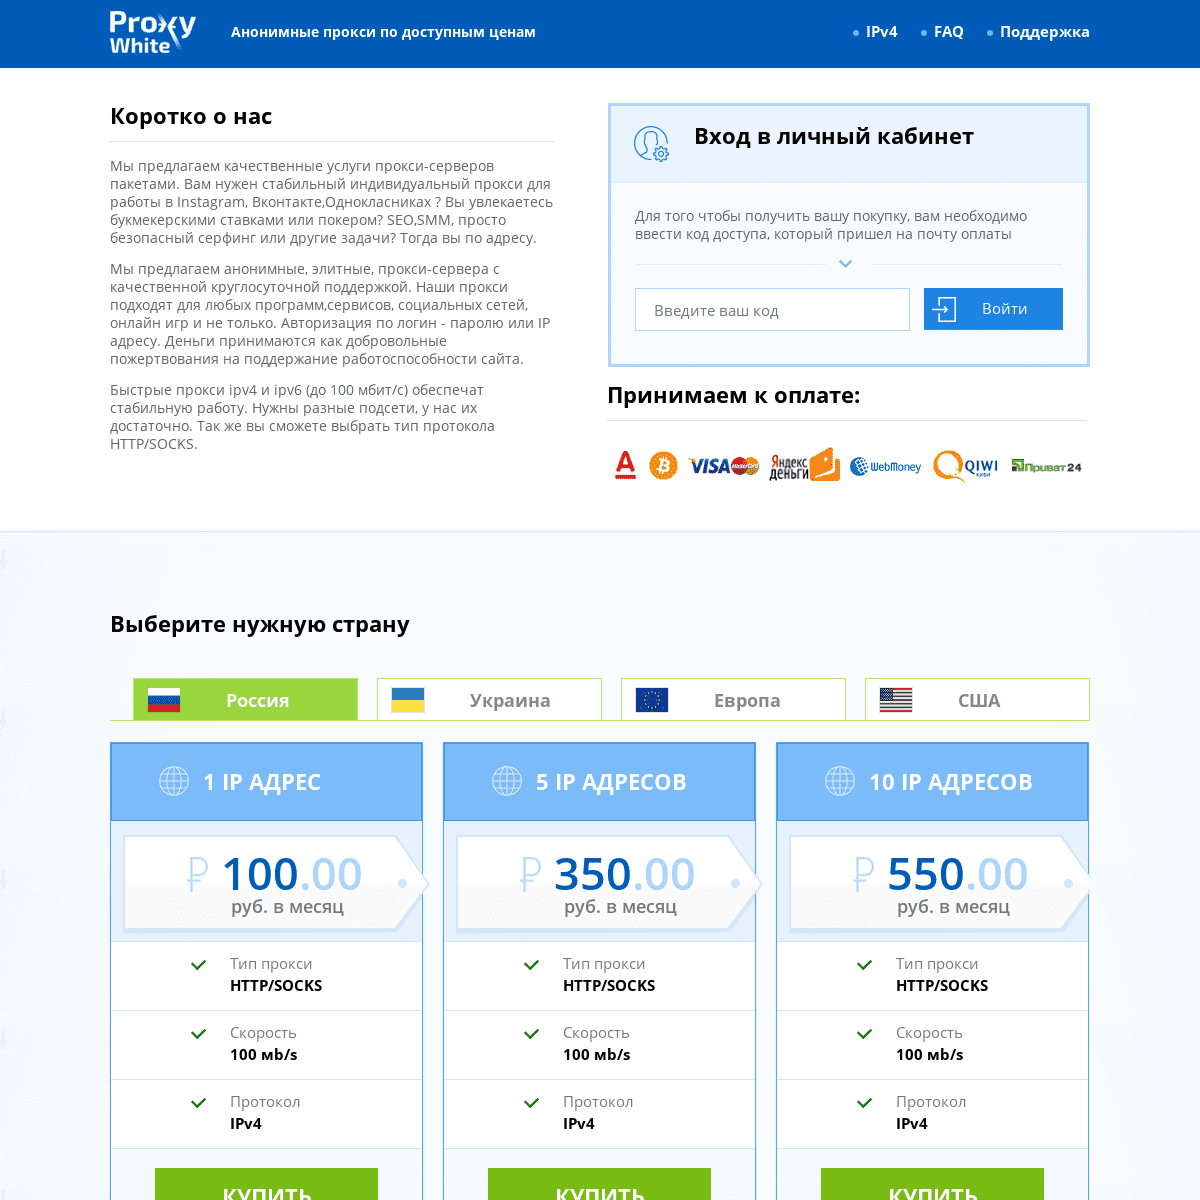 A complete backup of https://proxywhite.com